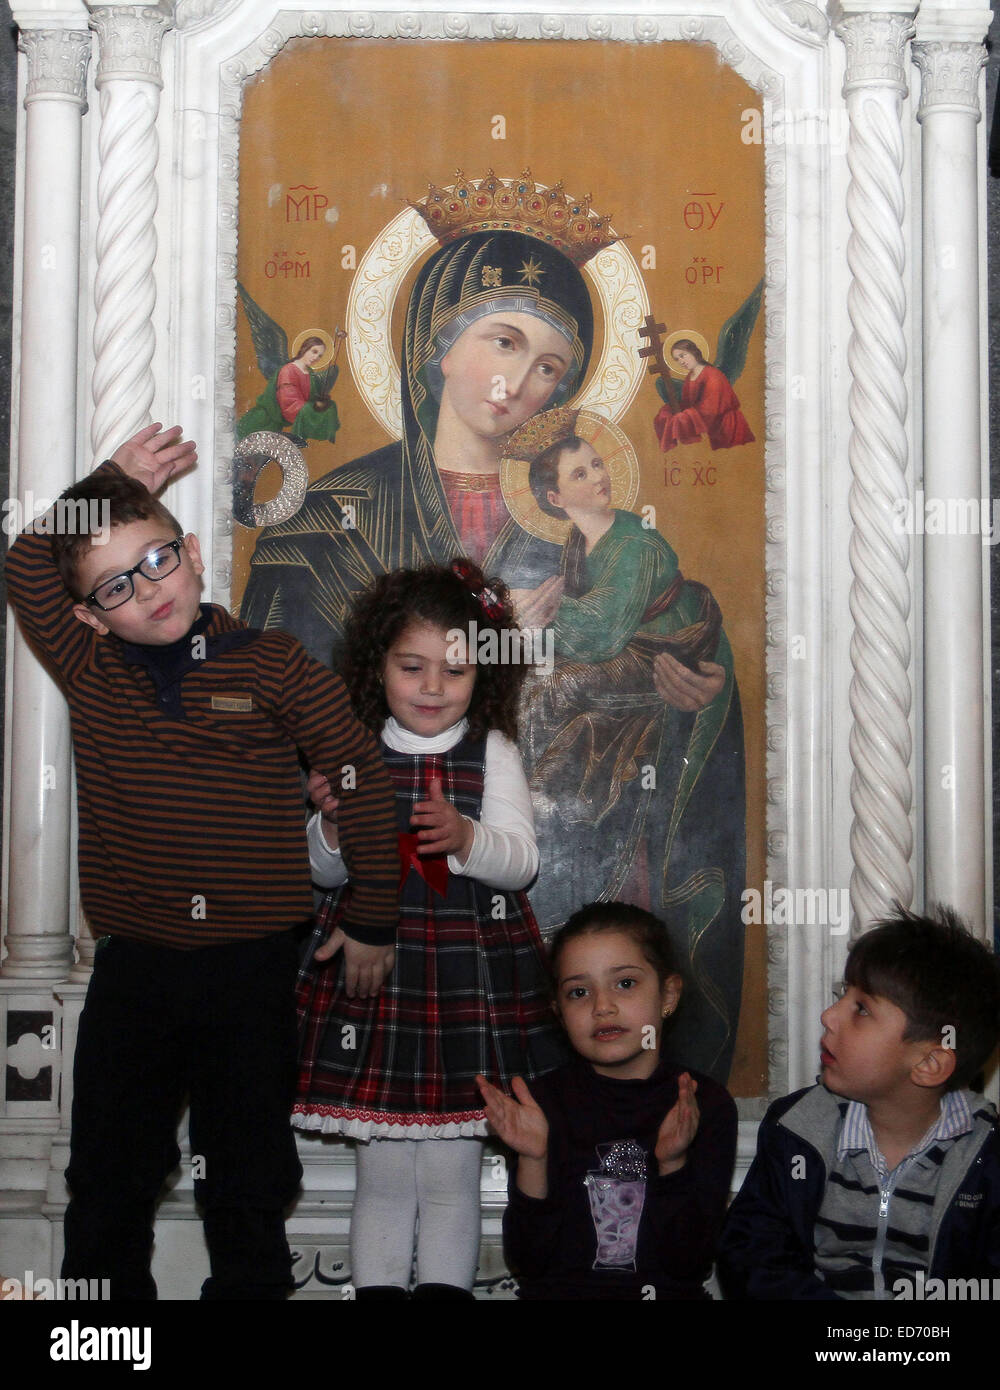 Damascus, Syria. 30th Dec, 2014. Children attend the Christmas celebration at al-Zaitoun Cathedral in Damascus, capital of Syria, on Dec. 30, 2014. About 1,500 Syrian Christian kids and their parents gathered at al-Zaitoun Cathedral in Syria's capital Damascus to take part in a Christmas celebration. About 10 percent of population in Syria are Christian, who suffered persecution in some parts of the country by the hands of the extremist groups. © Bassem Tellawi/Xinhua/Alamy Live News Stock Photo